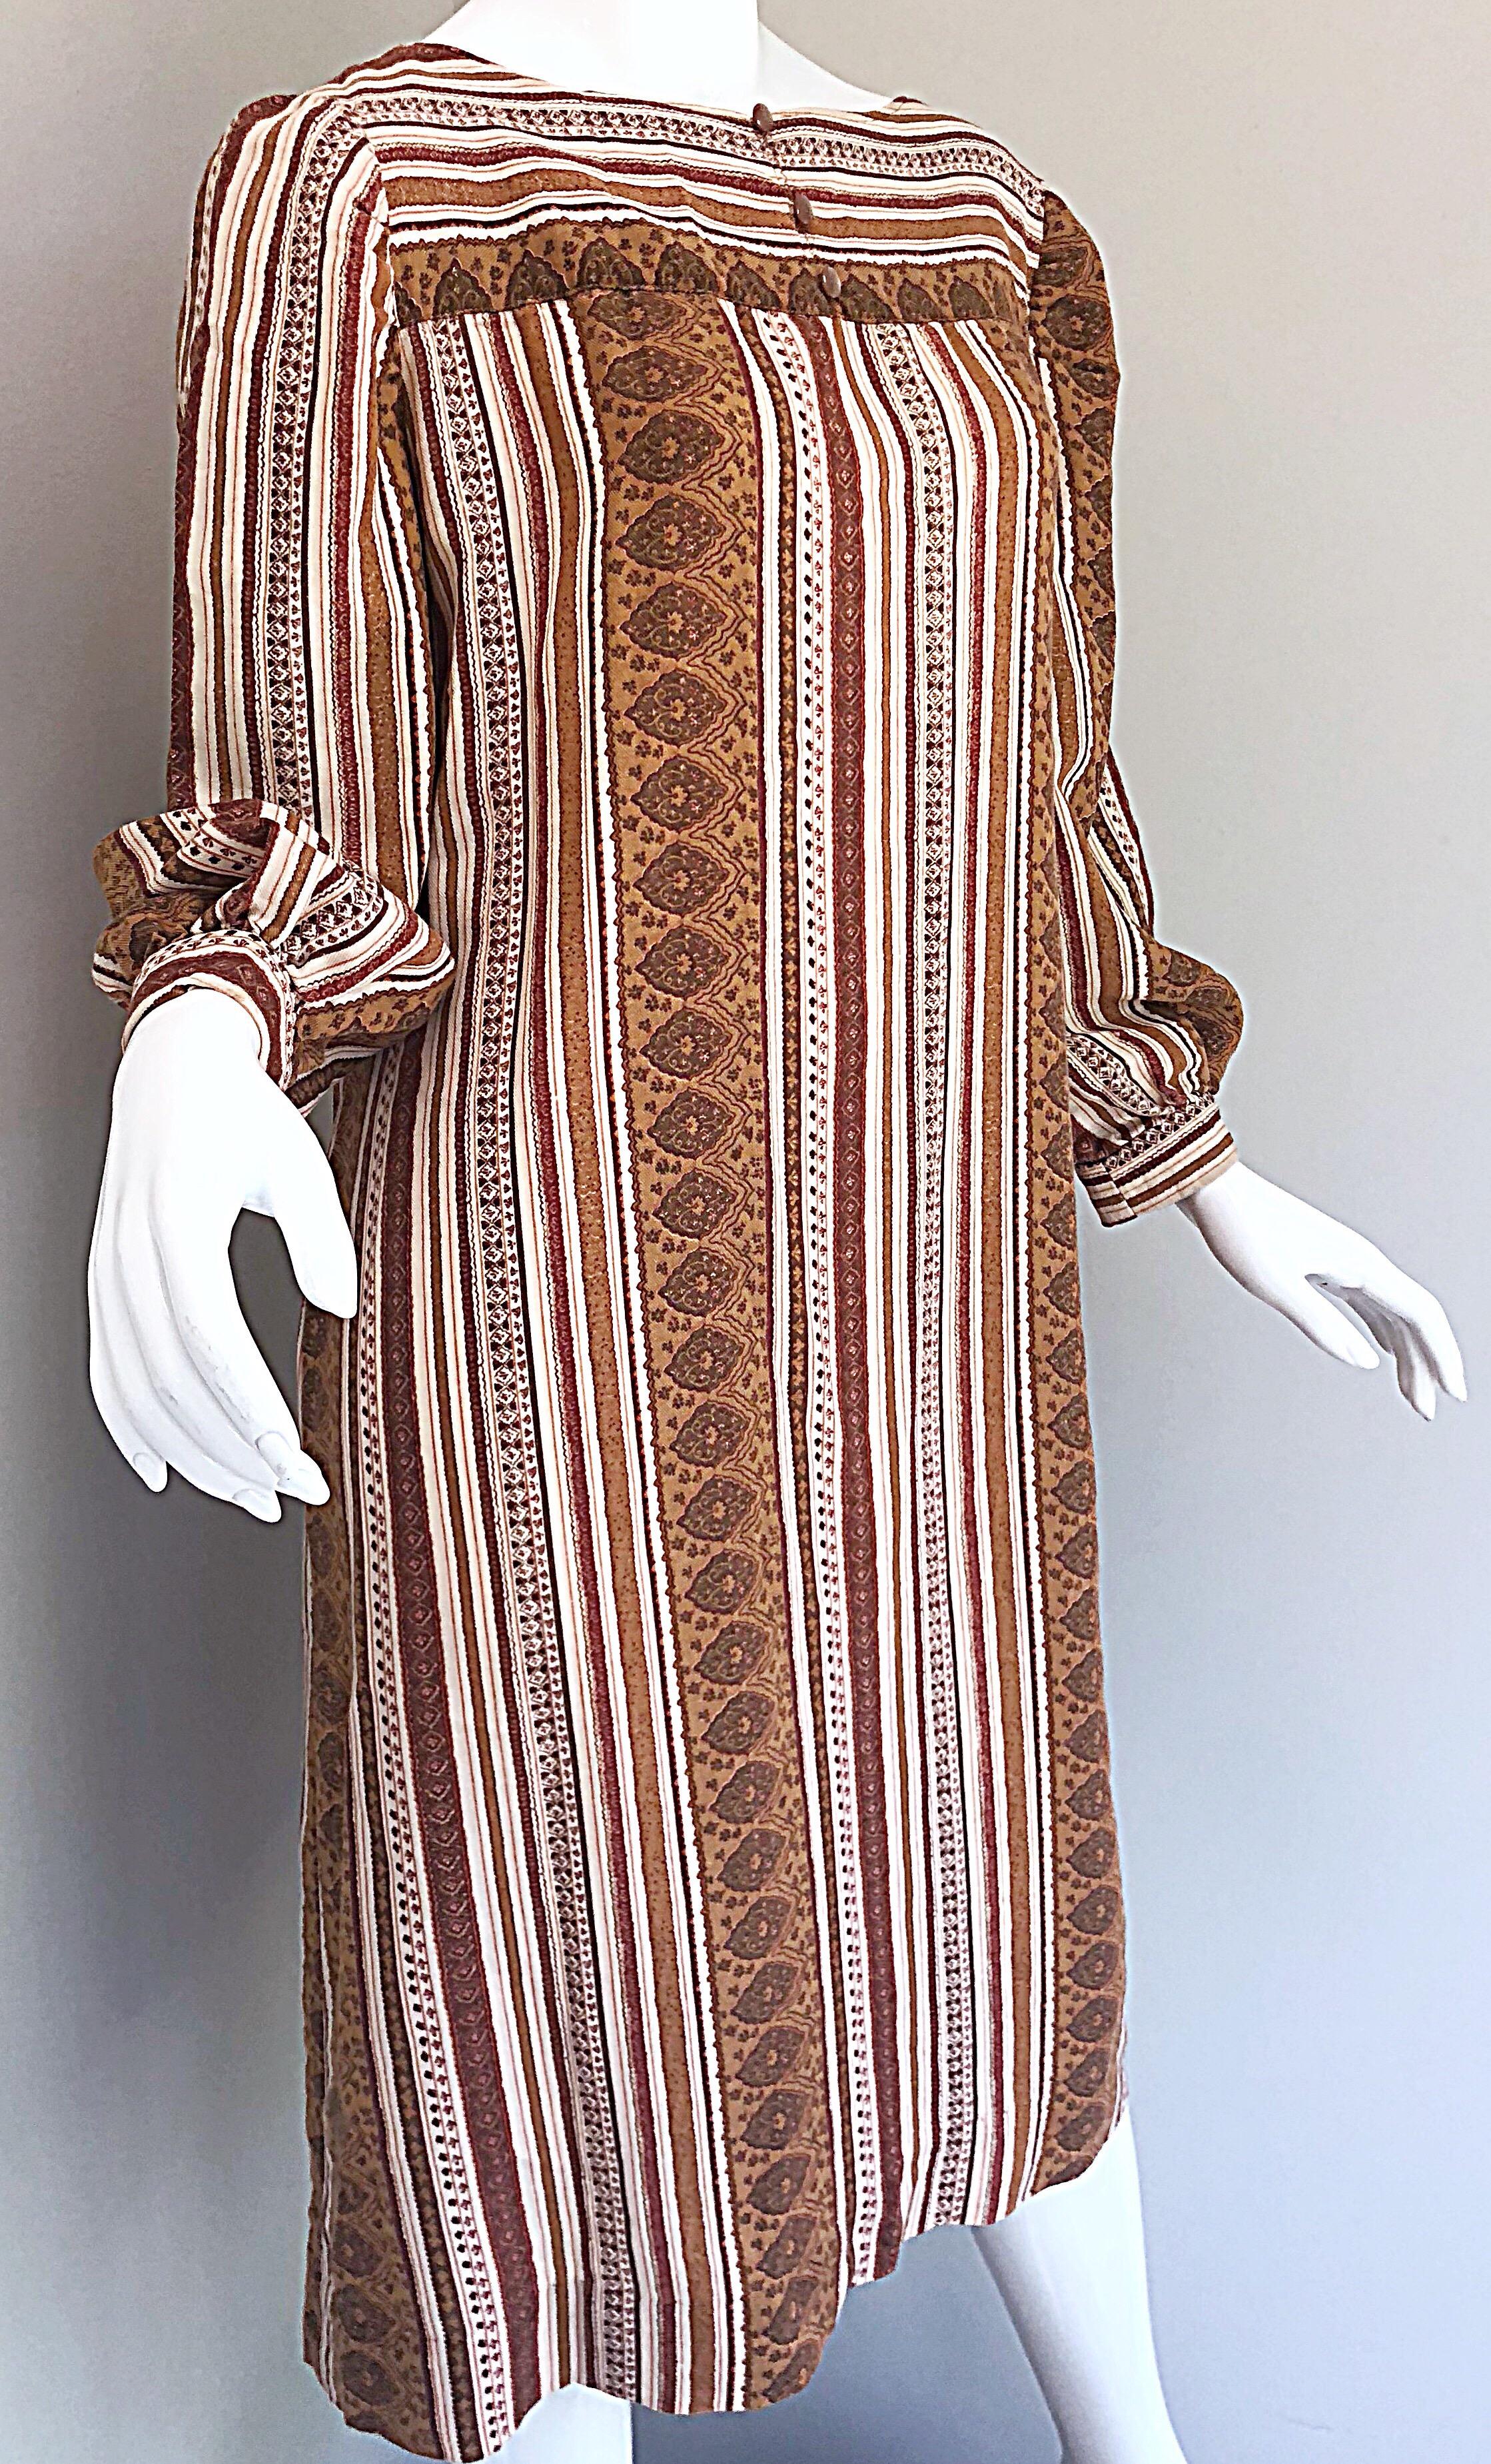 1970s Boho Chic Brown and Ivory Soft Cotton Paisley Print Vintage 70s Dress 2